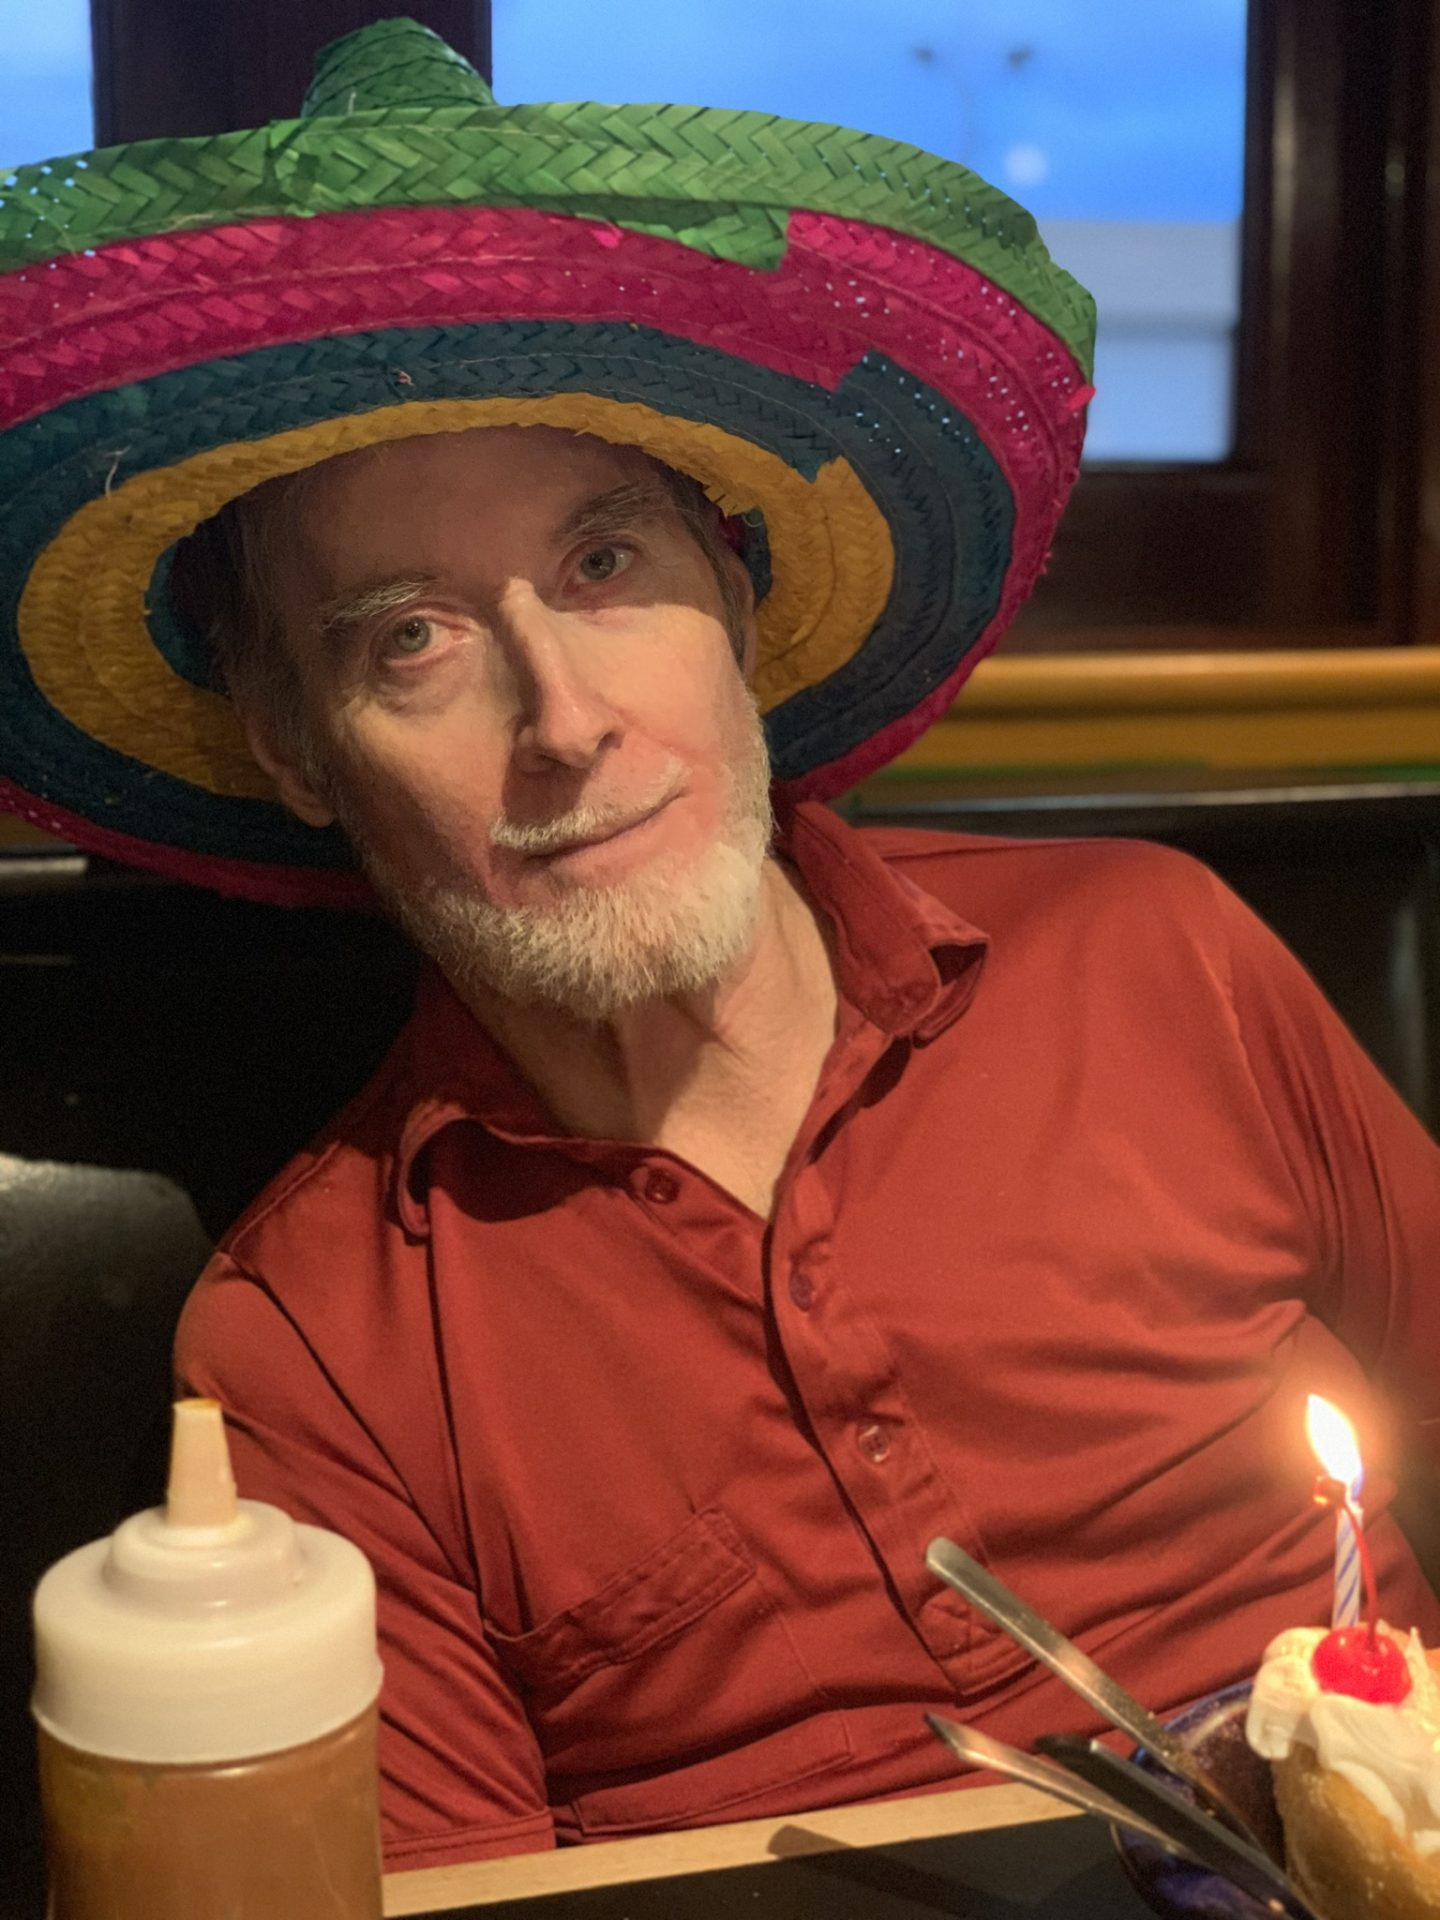 Ed’s birthday 2018 ...at what restaurant? Bet you can guess! Good Mexican food & a good time with family.